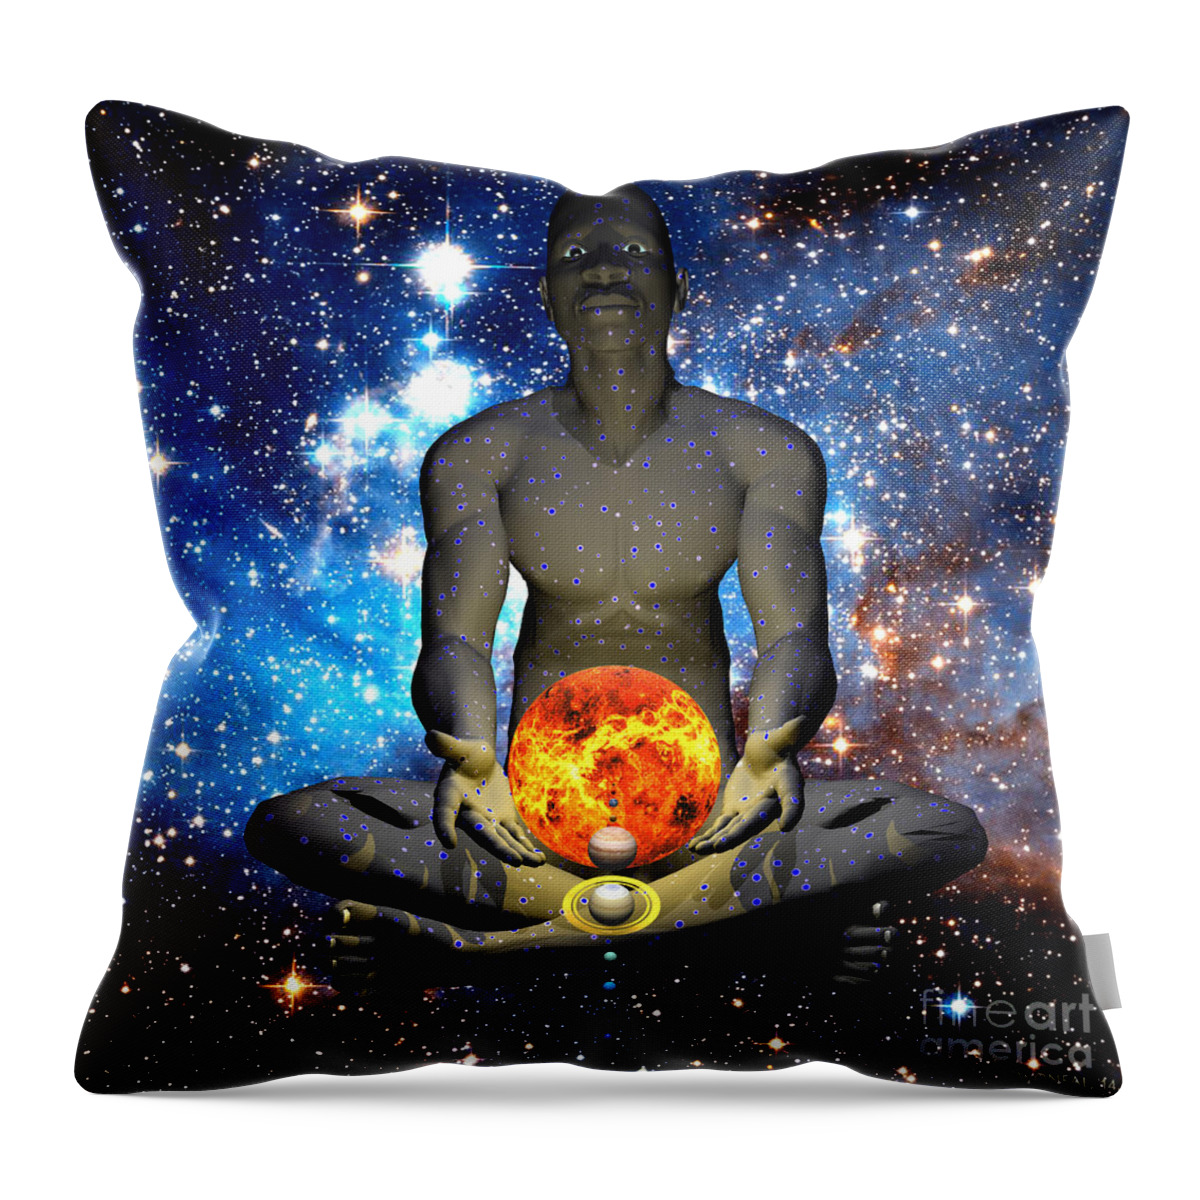 Male Portraits Throw Pillow featuring the digital art The Creator by Walter Neal